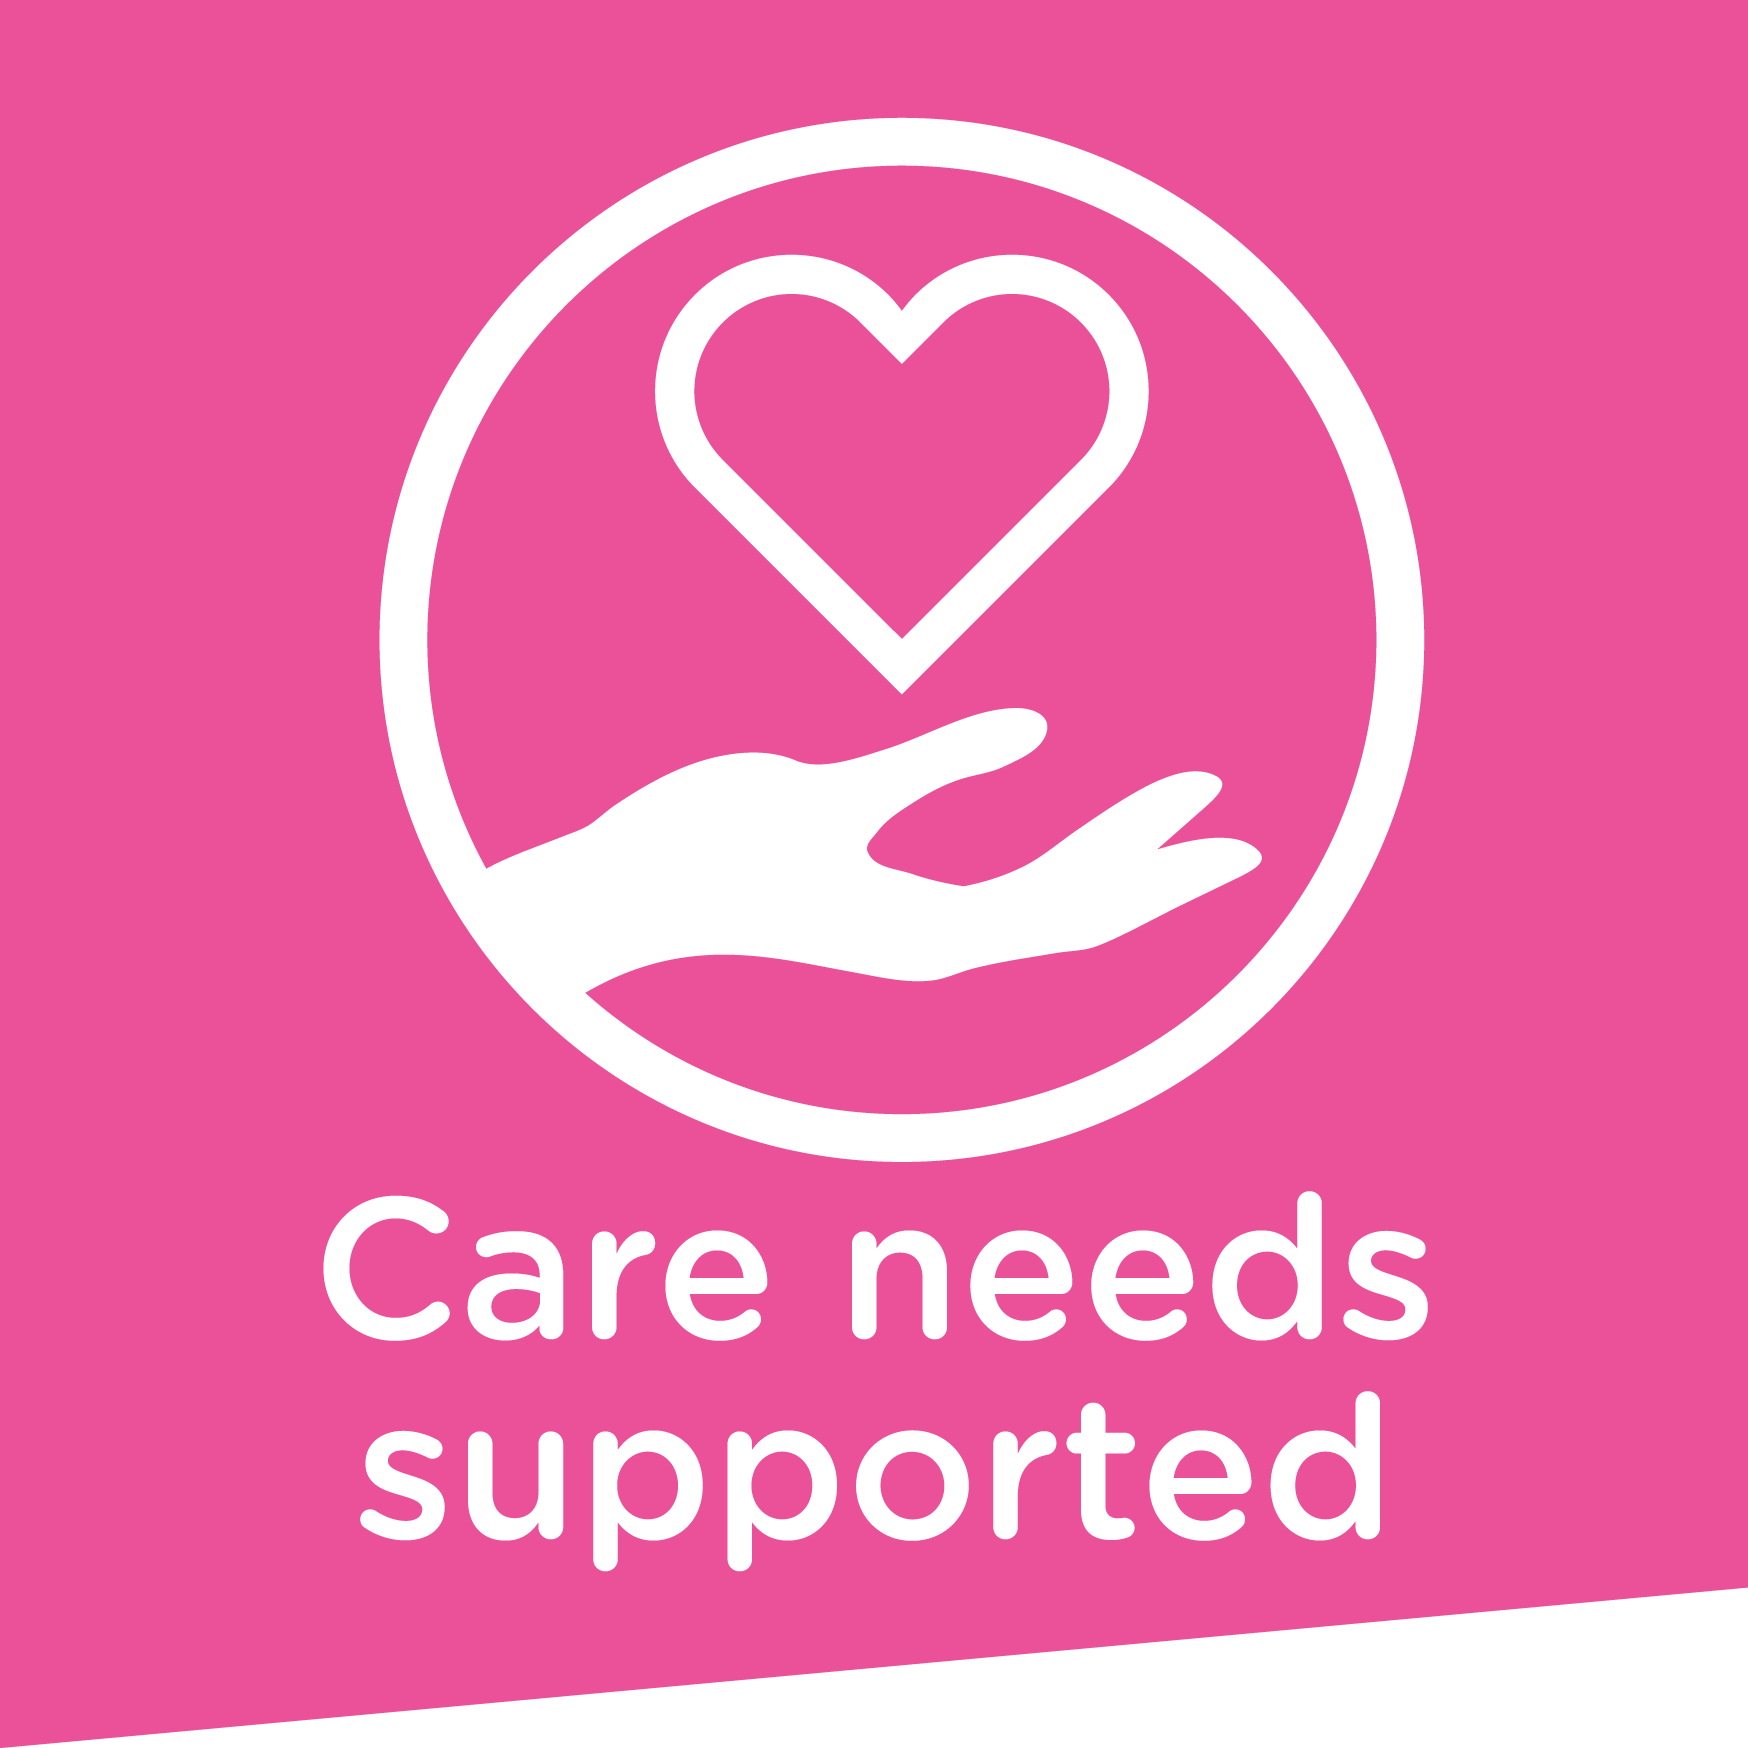 Care needs supported